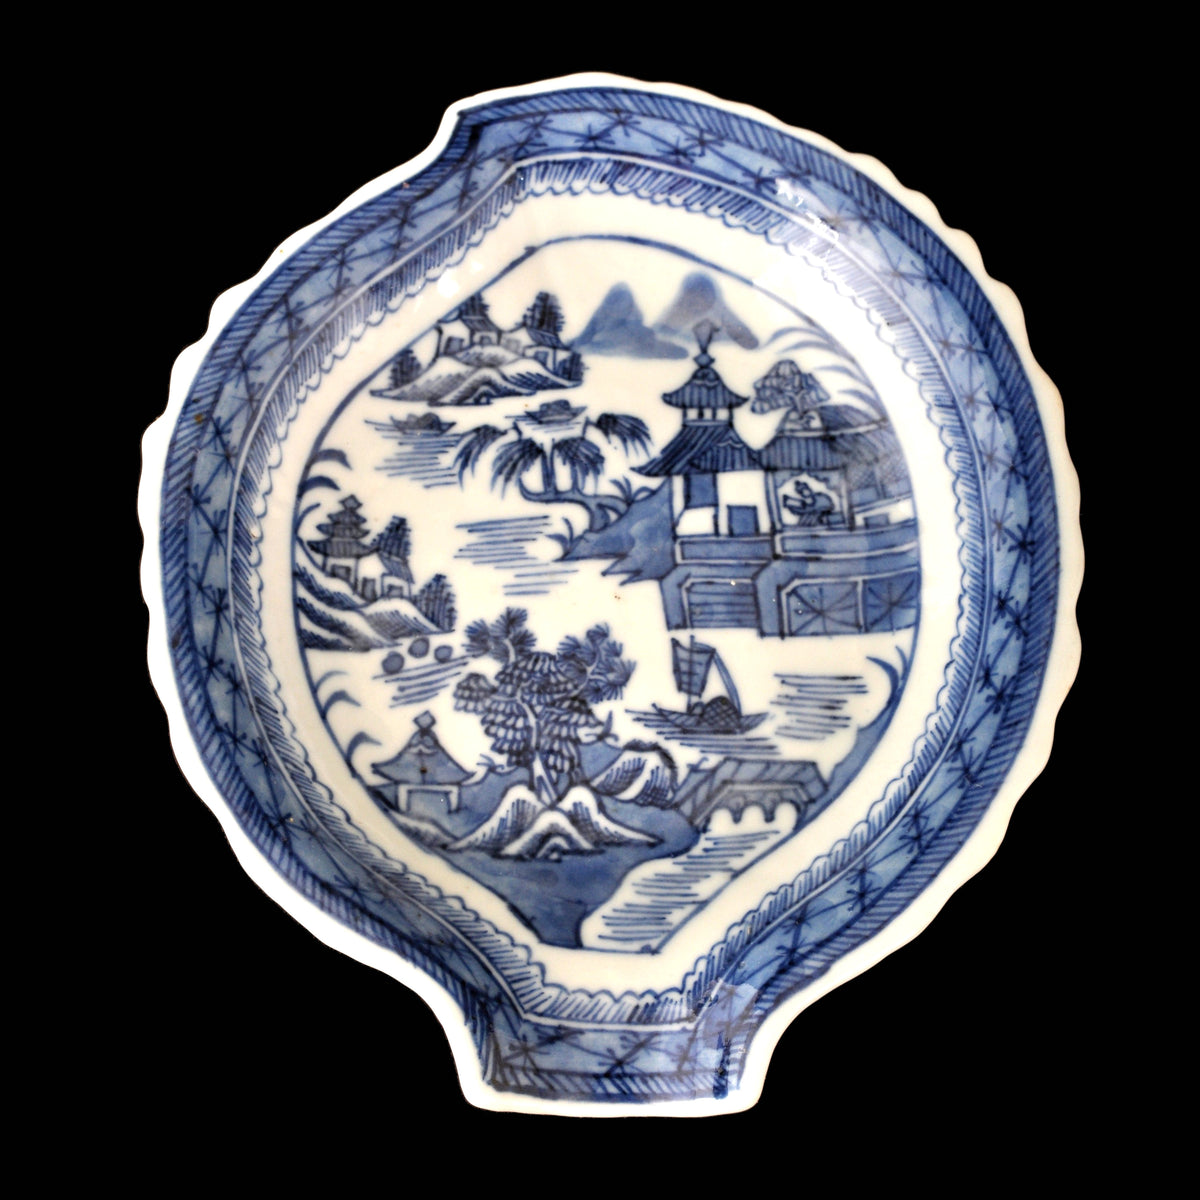 Antique Chinese Qing Dynasty Canton Blue & White Porcelain Brush Holder/Plate, Circa 1840